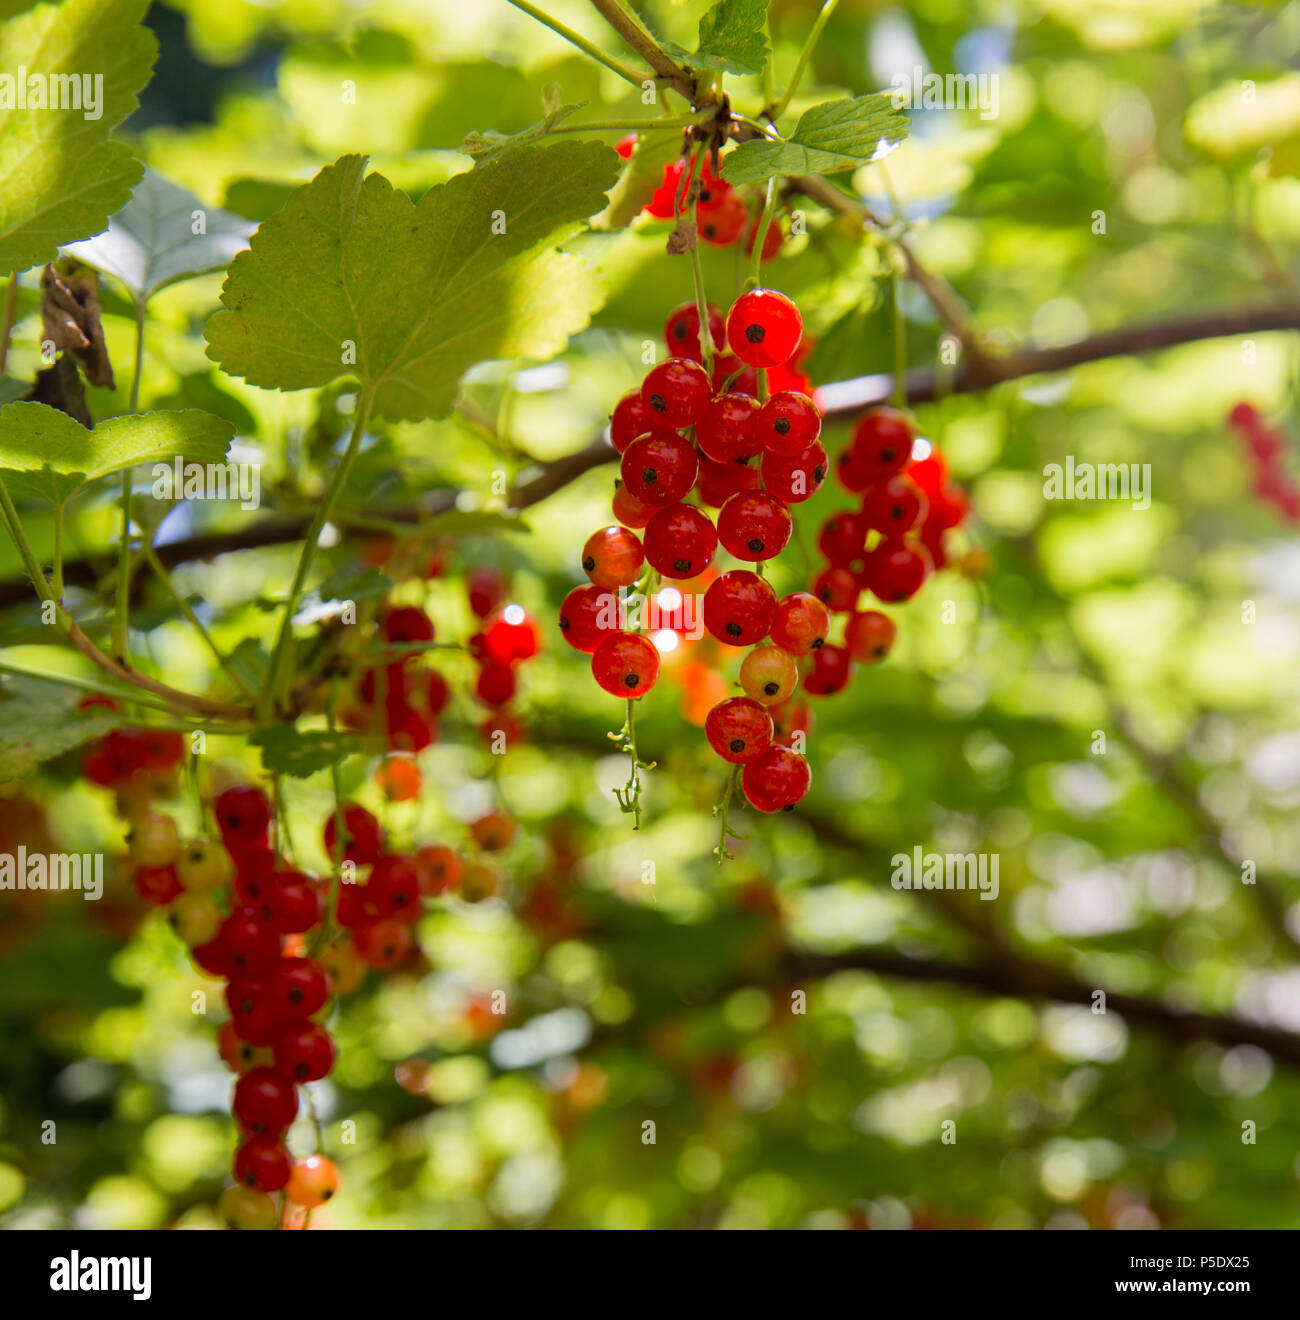 Bowl of red currant (Ribes rubrum) Stock Photo